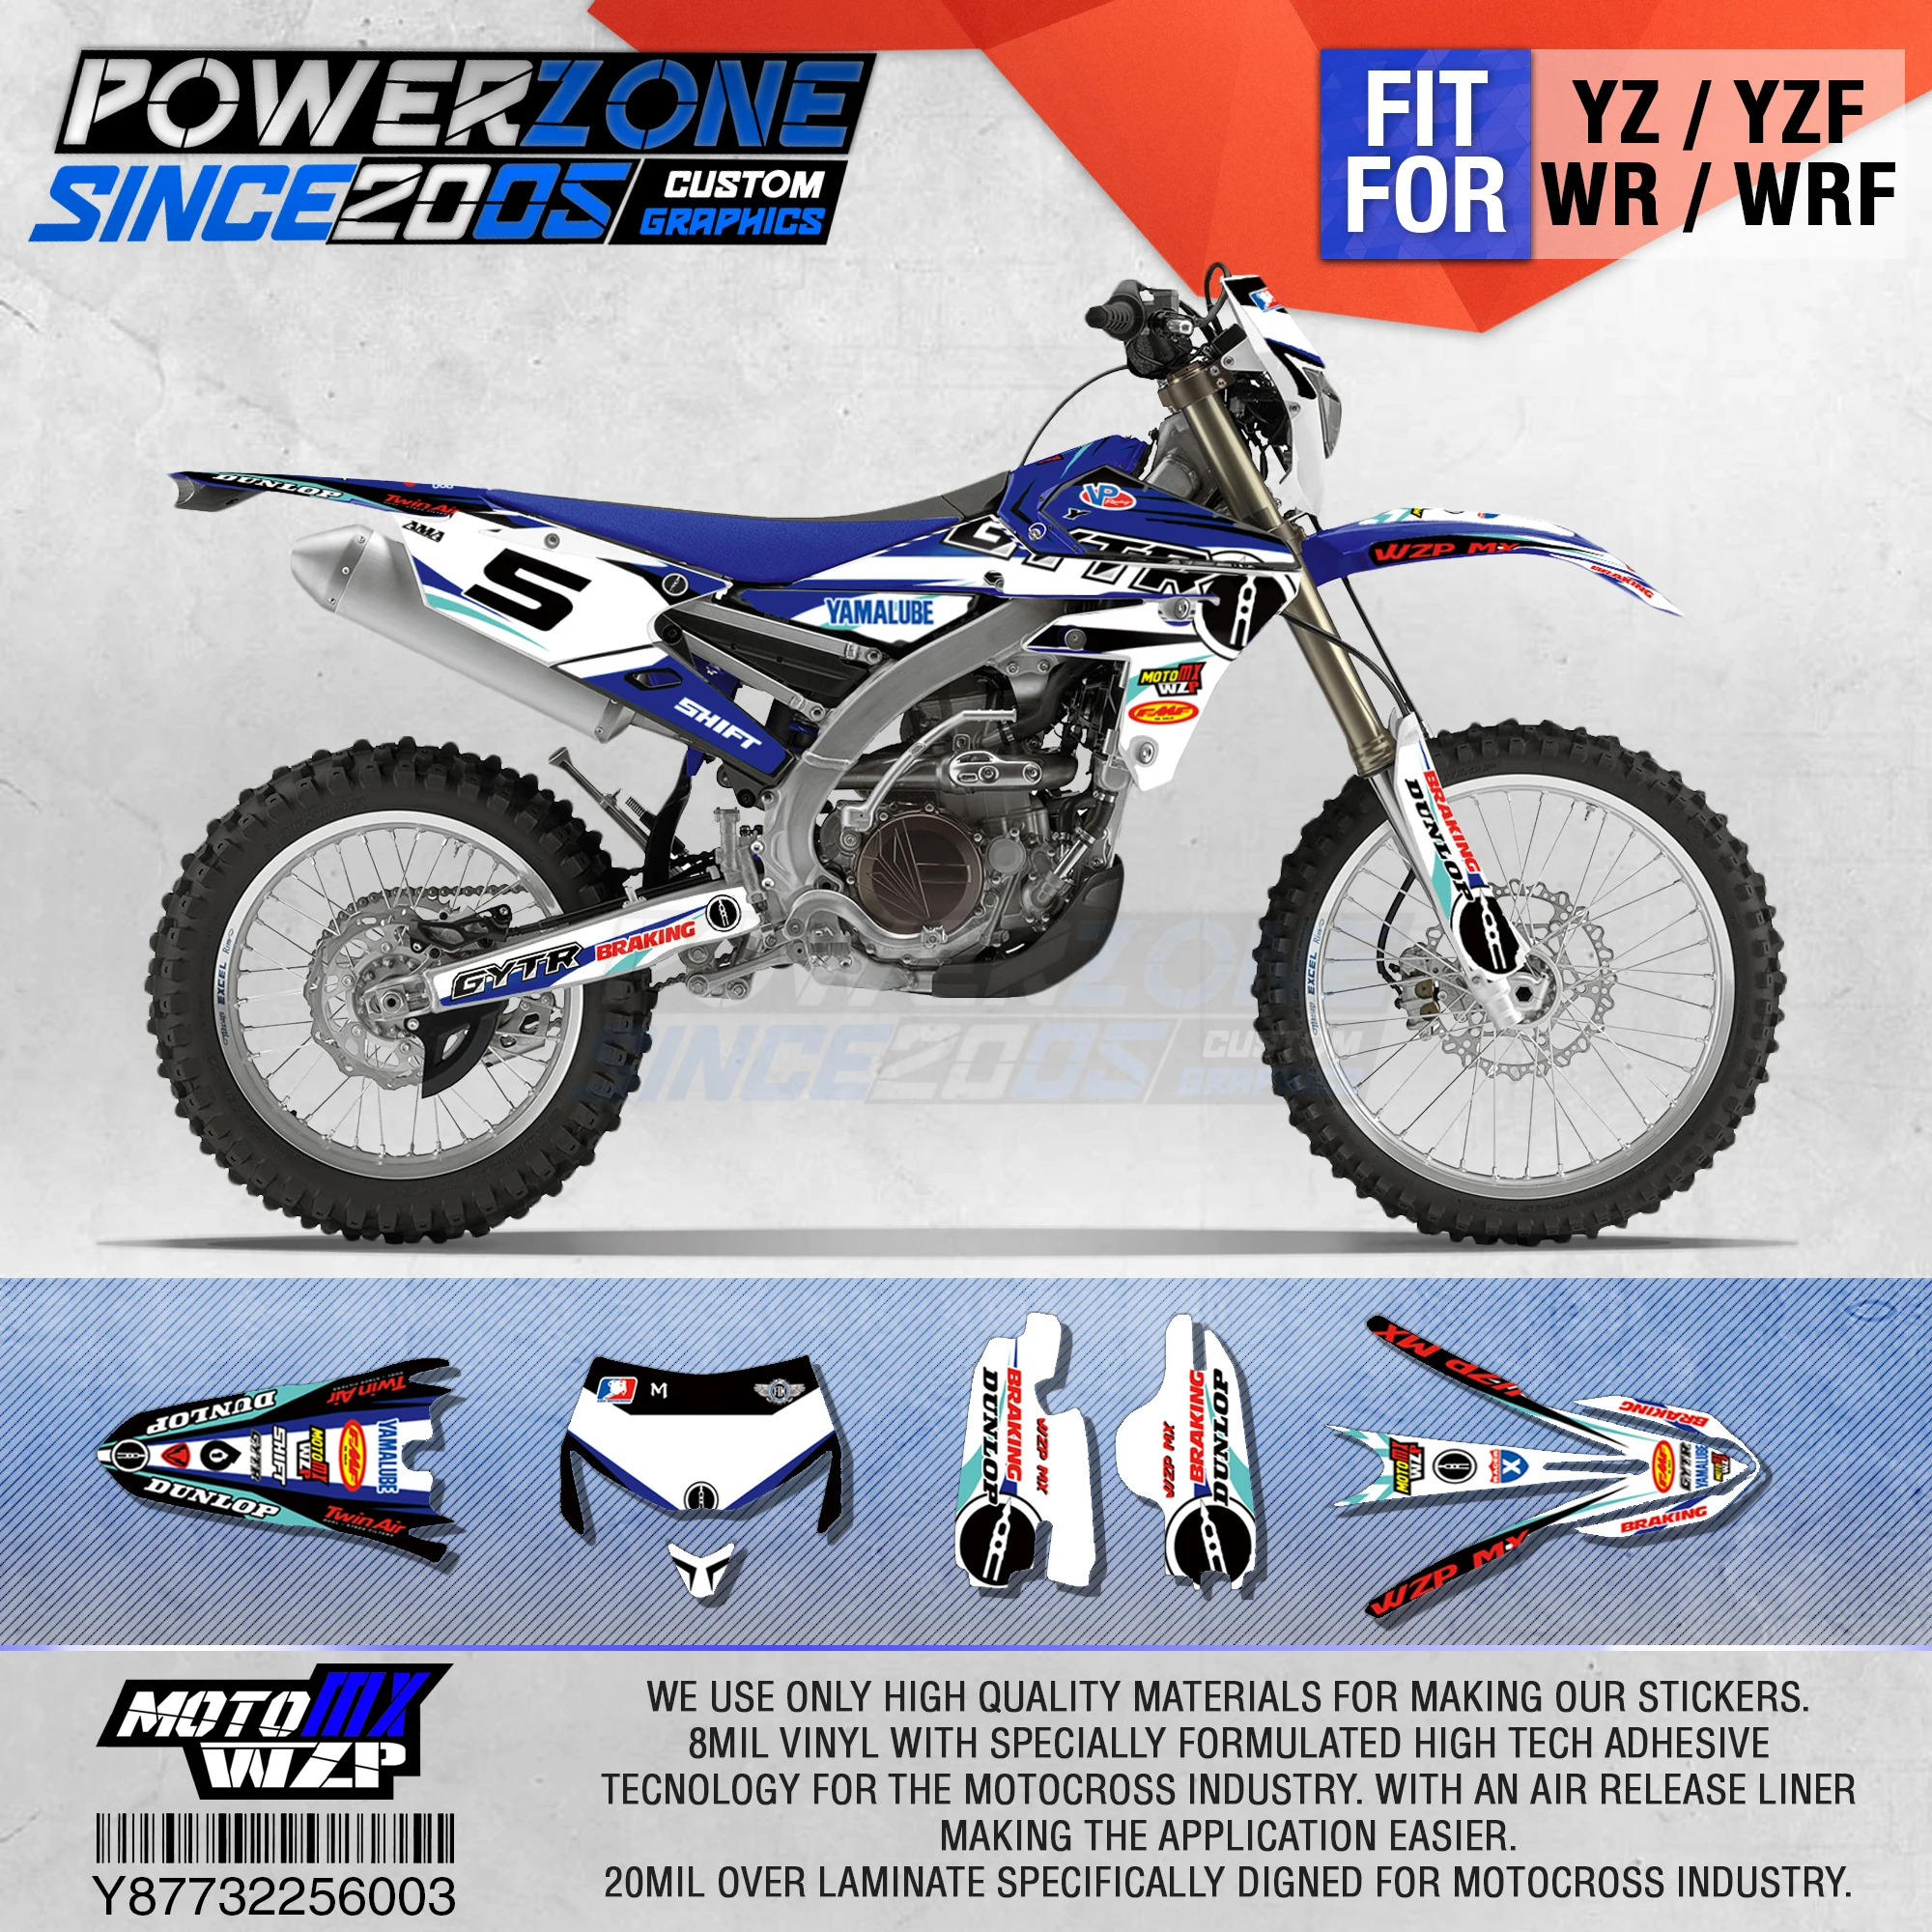 

PowerZone Customized Team Graphics Backgrounds Decals 3M Custom Stickers For YAMAHA WR450F WR WRF 450cc 2016 2017 2018 2019 003